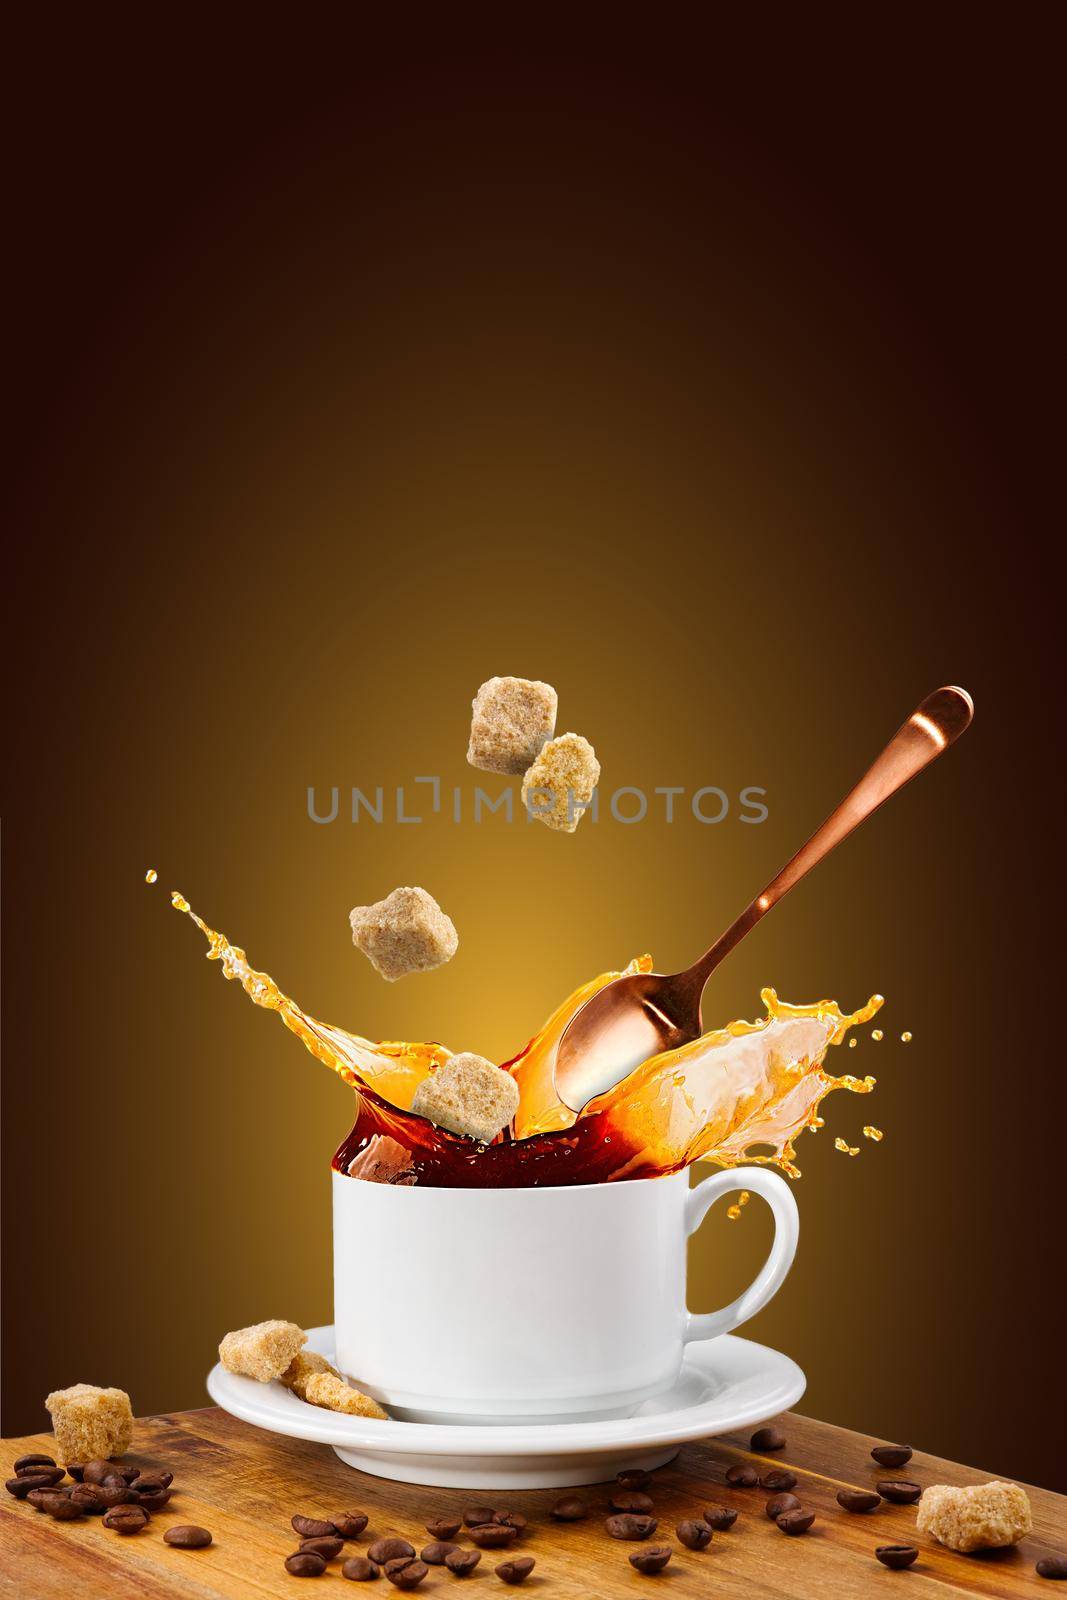 Falling coffee cup. Cup of coffee splashes while falling. Splash in white coffee cup. Hot beverage splashing, food levitation